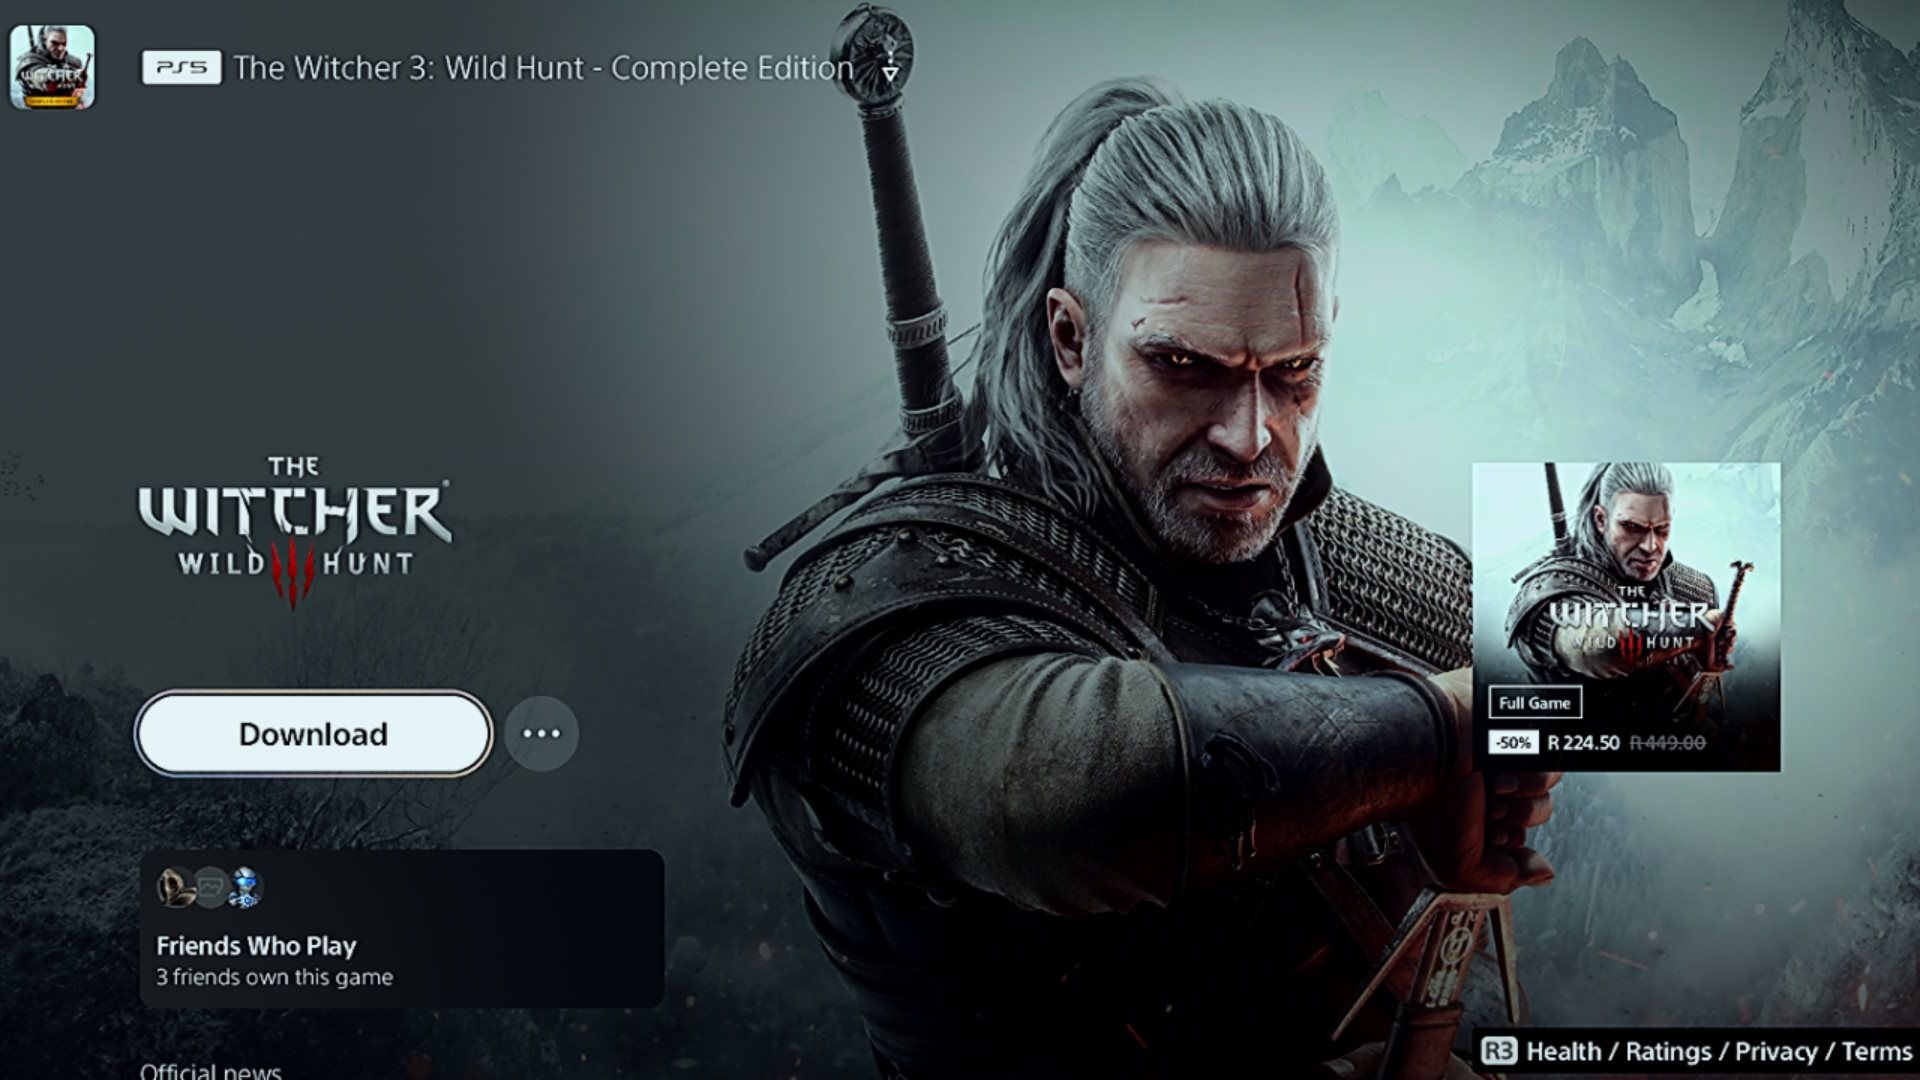 the download page of the Witcher 3 on PS5